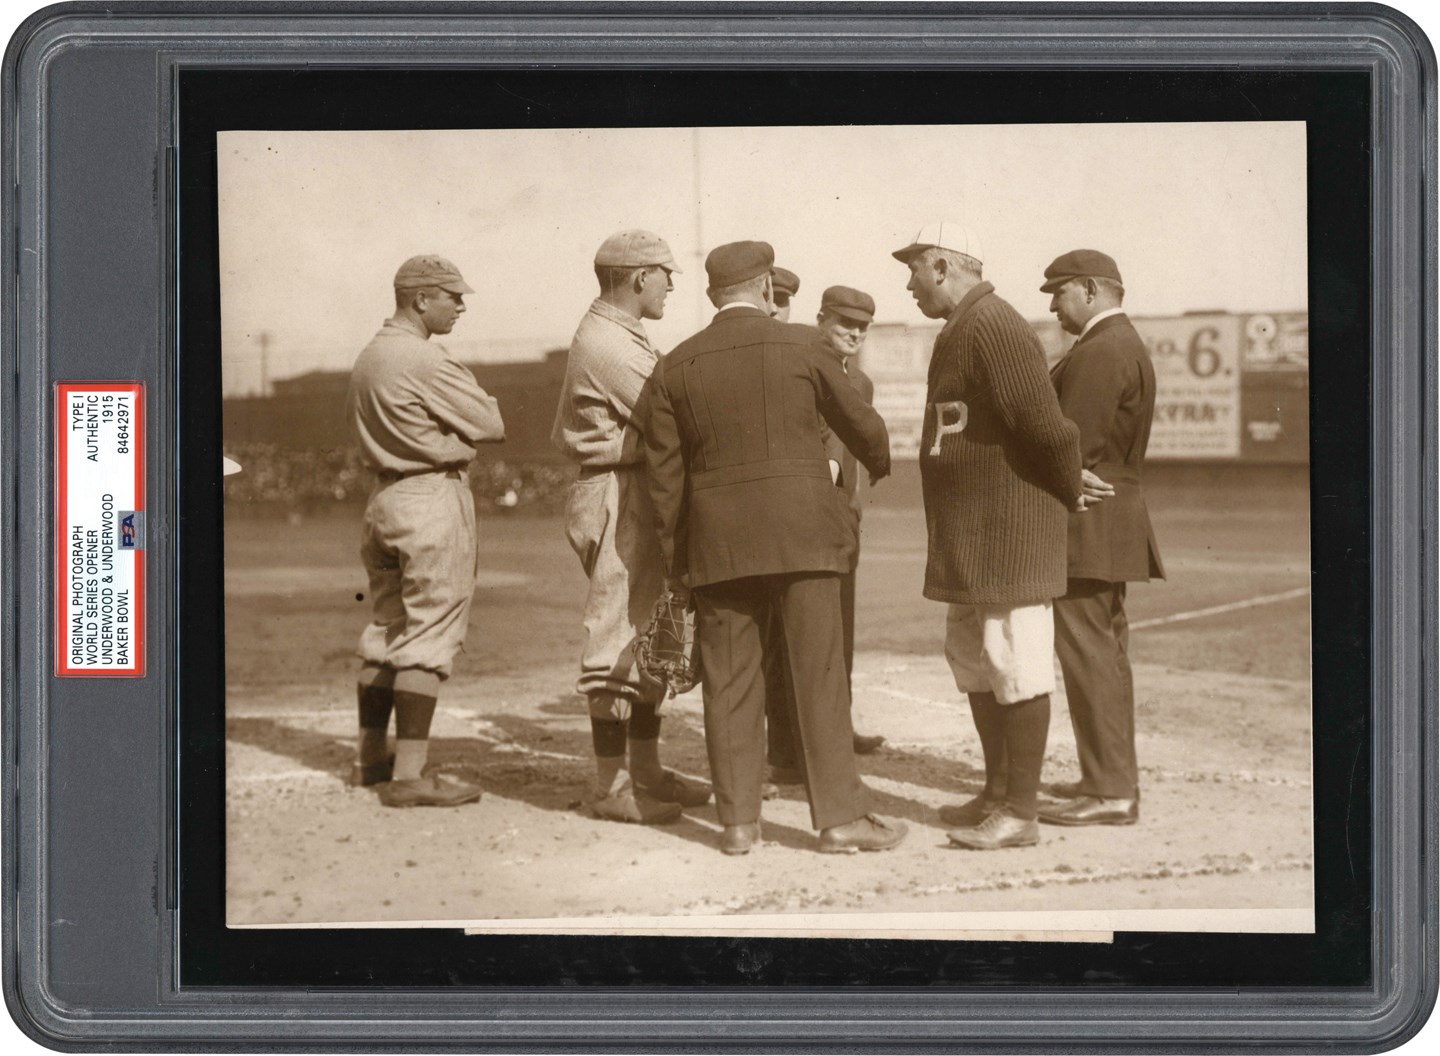 - 1915 World Series Photo Game 1 - Conference at the Plate (PSA Type I)